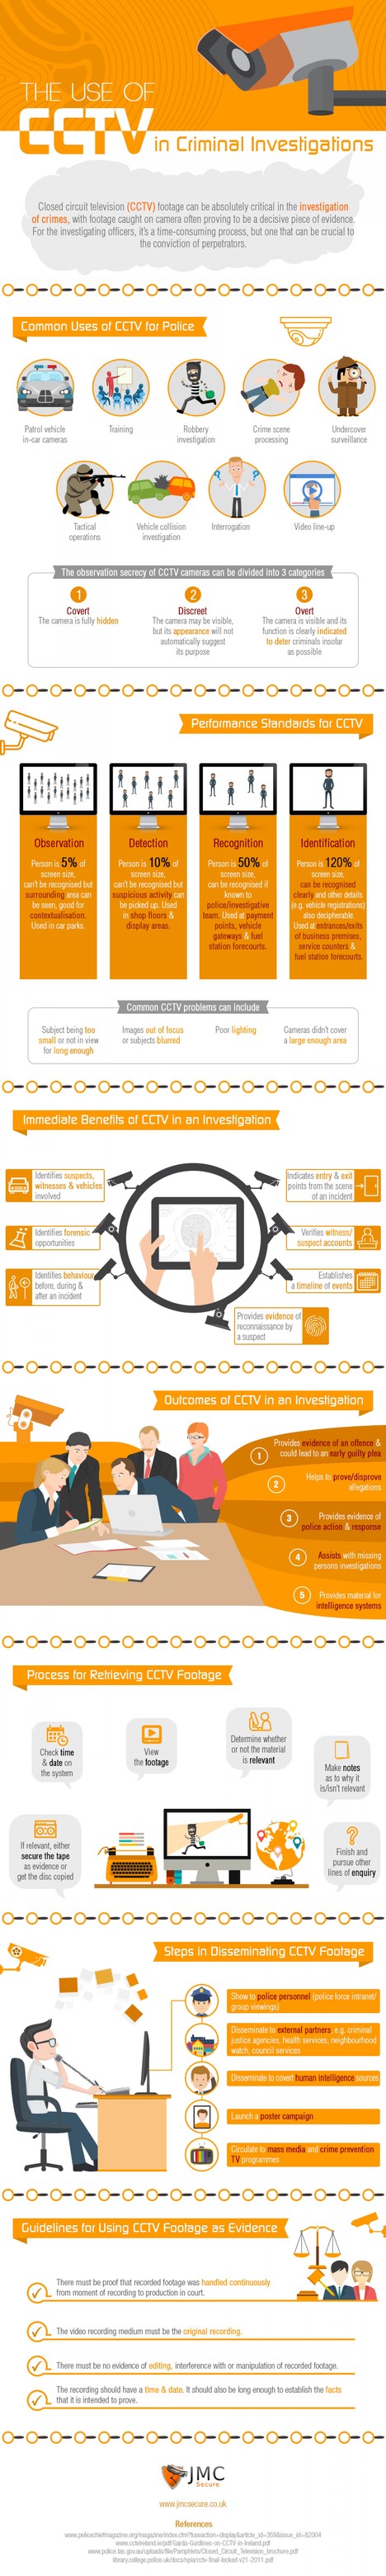 How CCTV is Used in Criminal Investigations